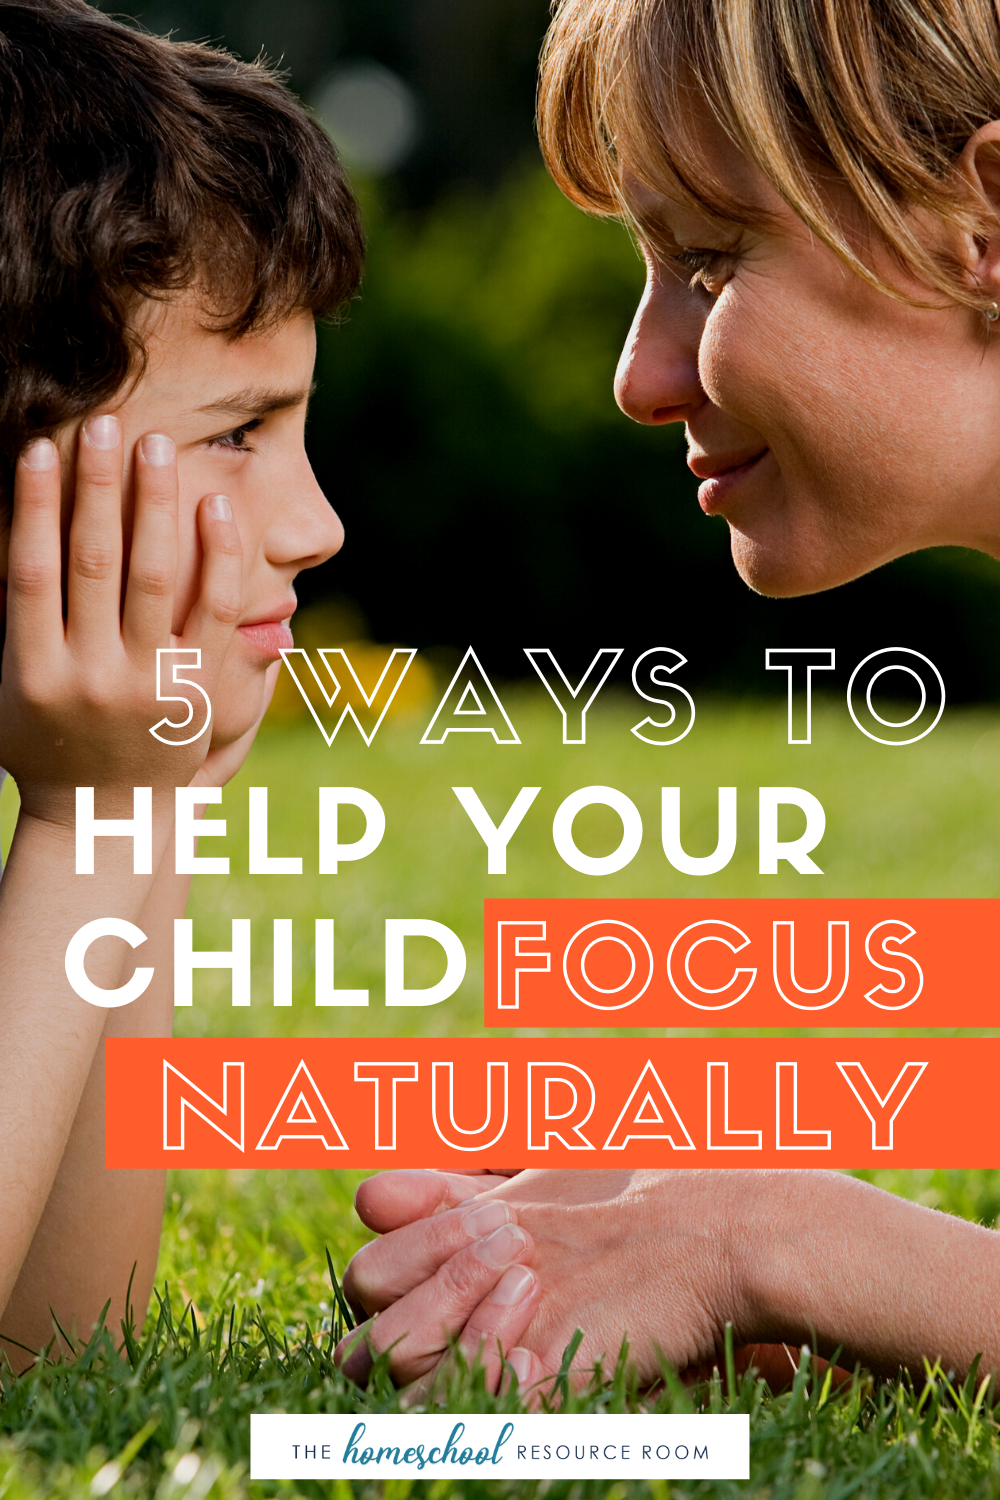 Help my child focus naturally: 5 tried and true ways to help your child at home.